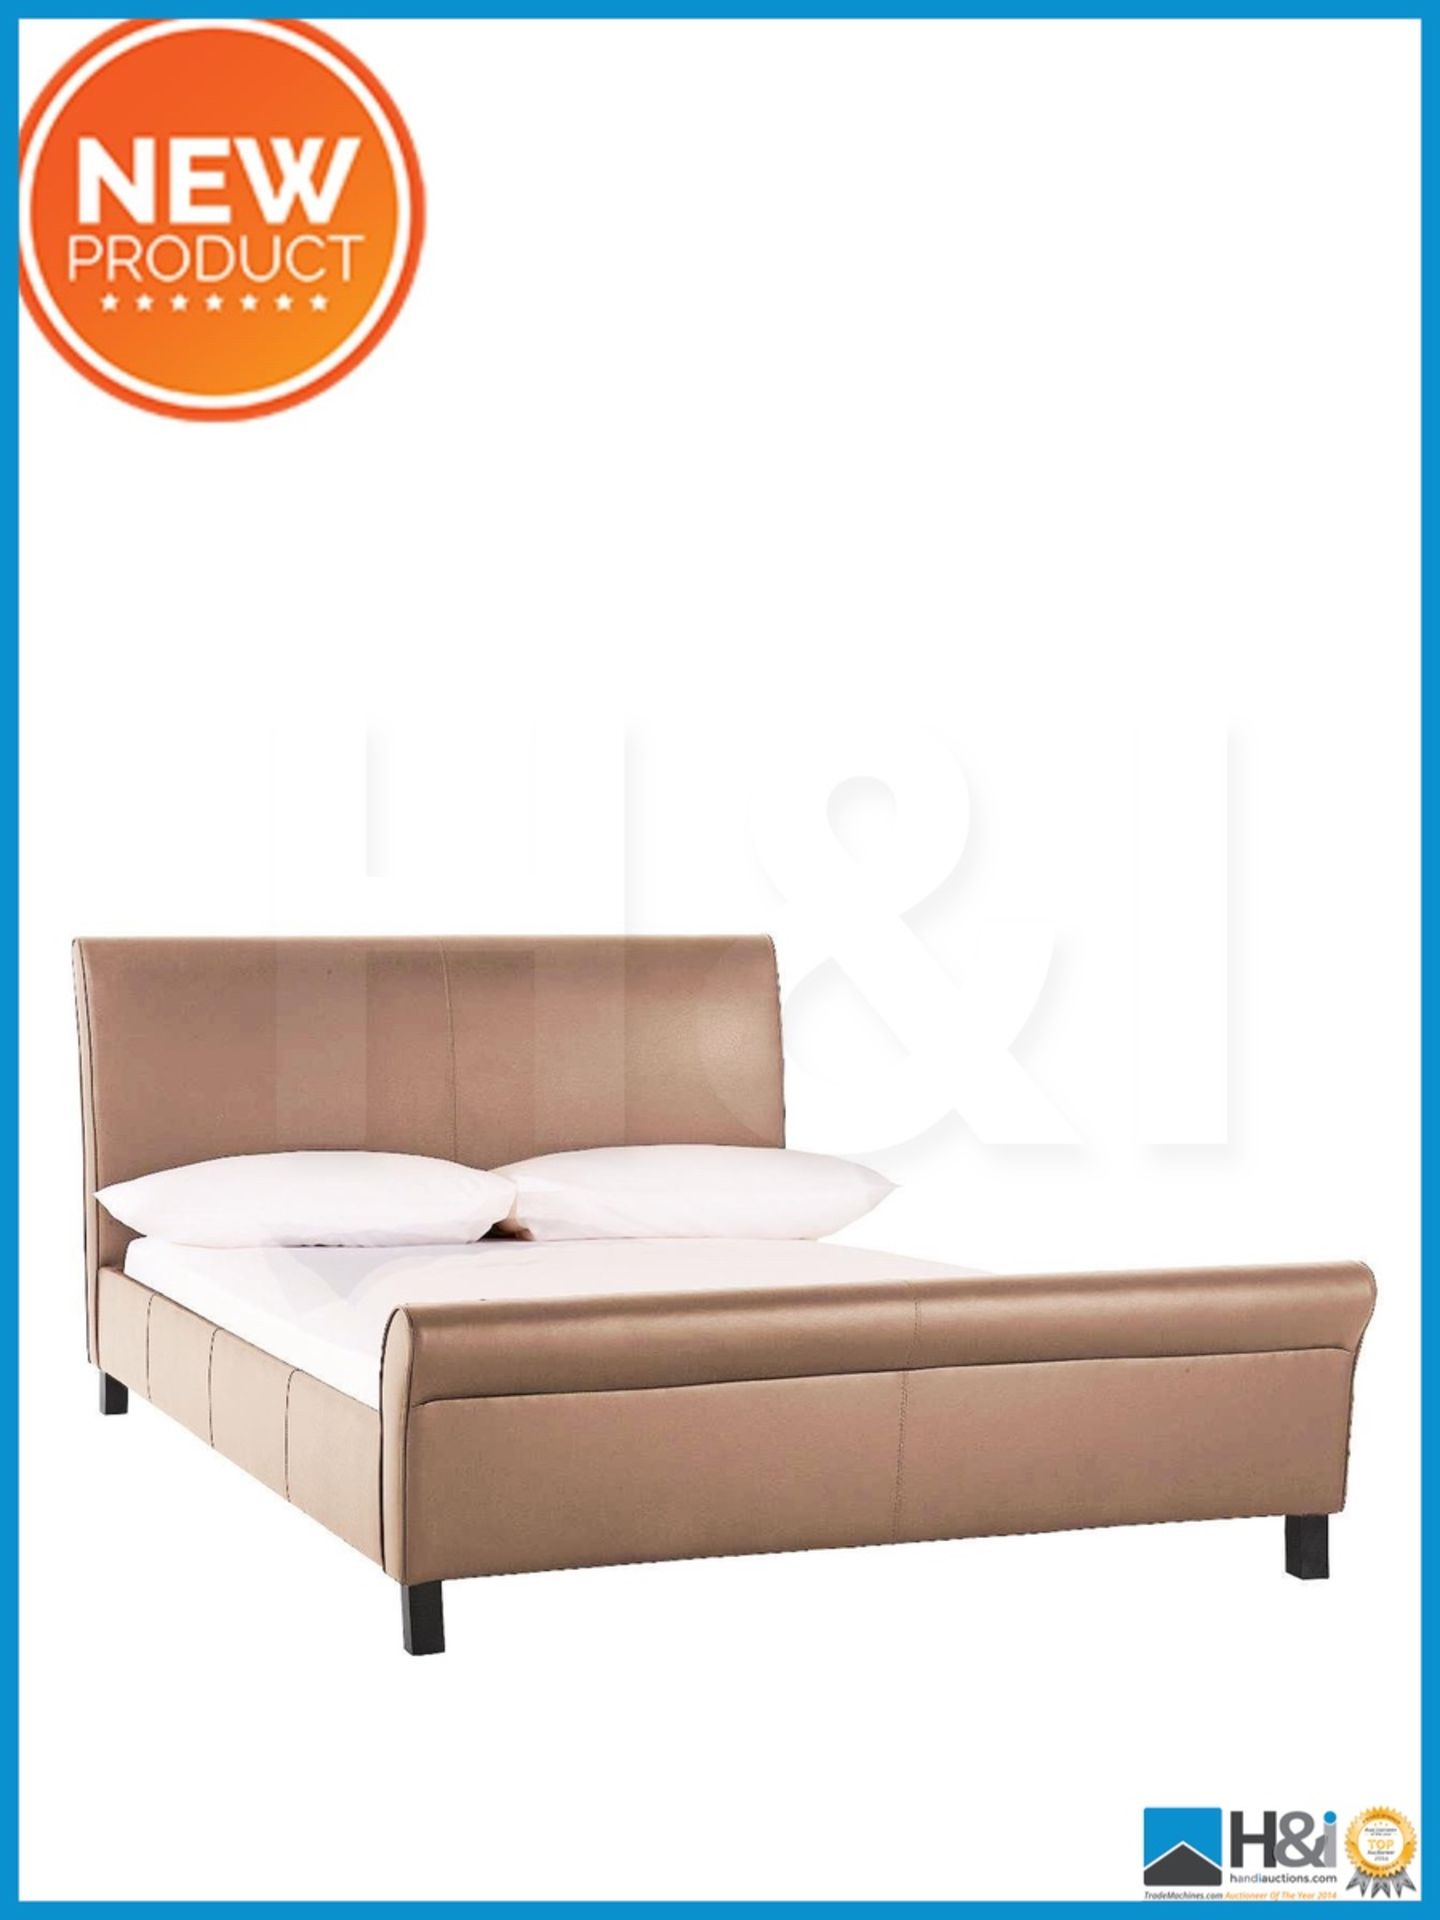 DAMAGED BOX ITEM A1 SILENTNIGHT HAWTHORNE KING BED [TAUPE] 0 x 0 x 0cm RRP £779 Appraisal: Viewing